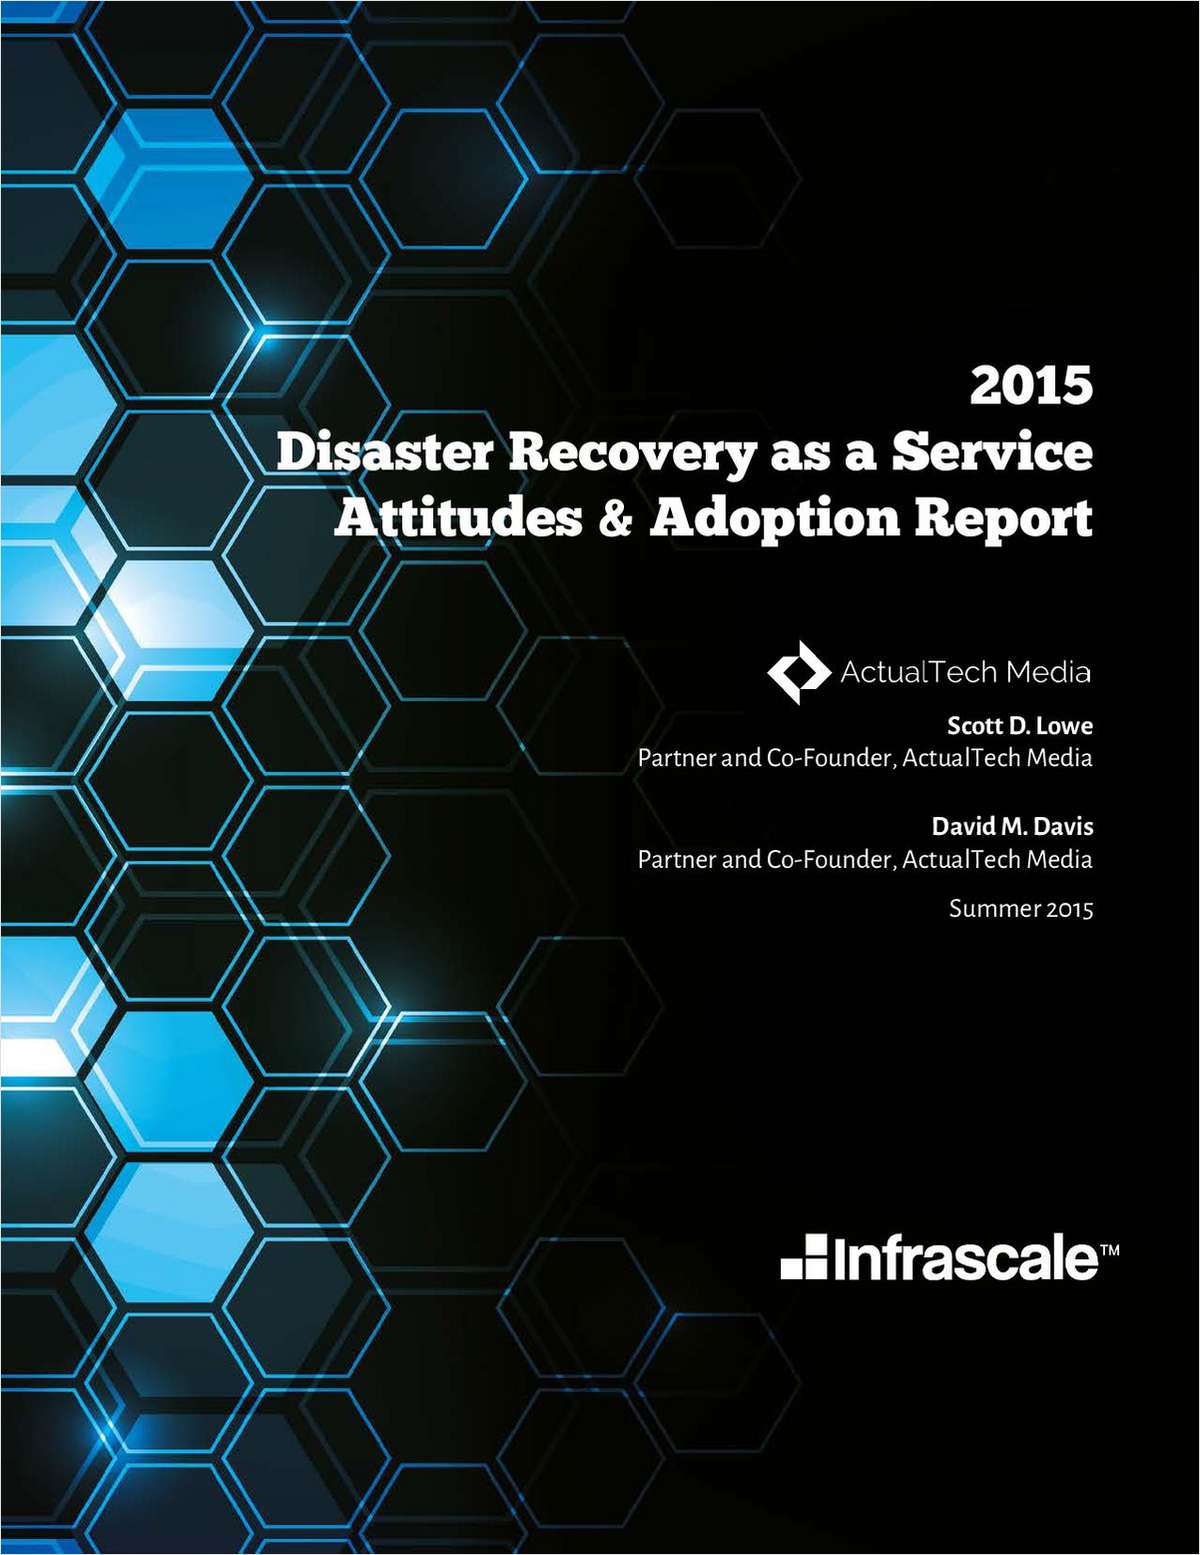 Disaster Recovery as a Service: Attitudes & Adoption Report